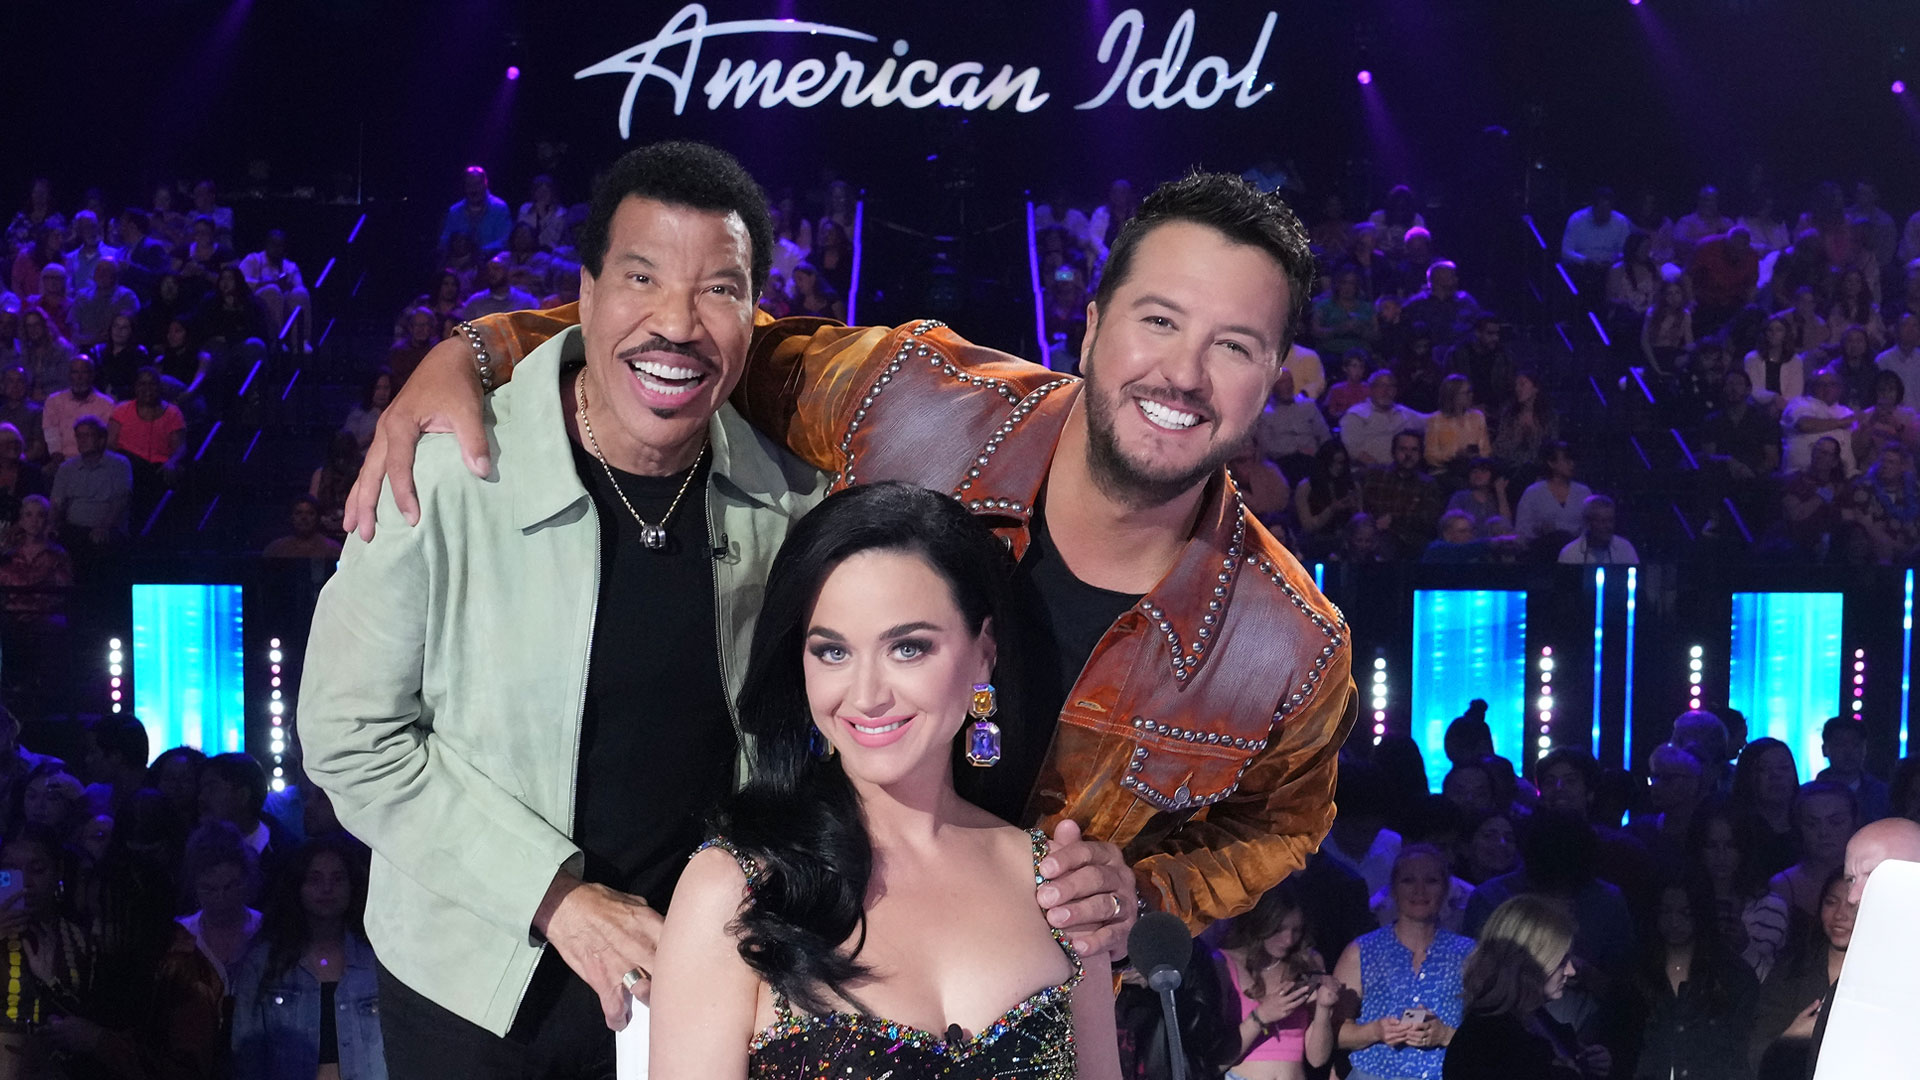 Katy announced this week that she's quitting American Idol